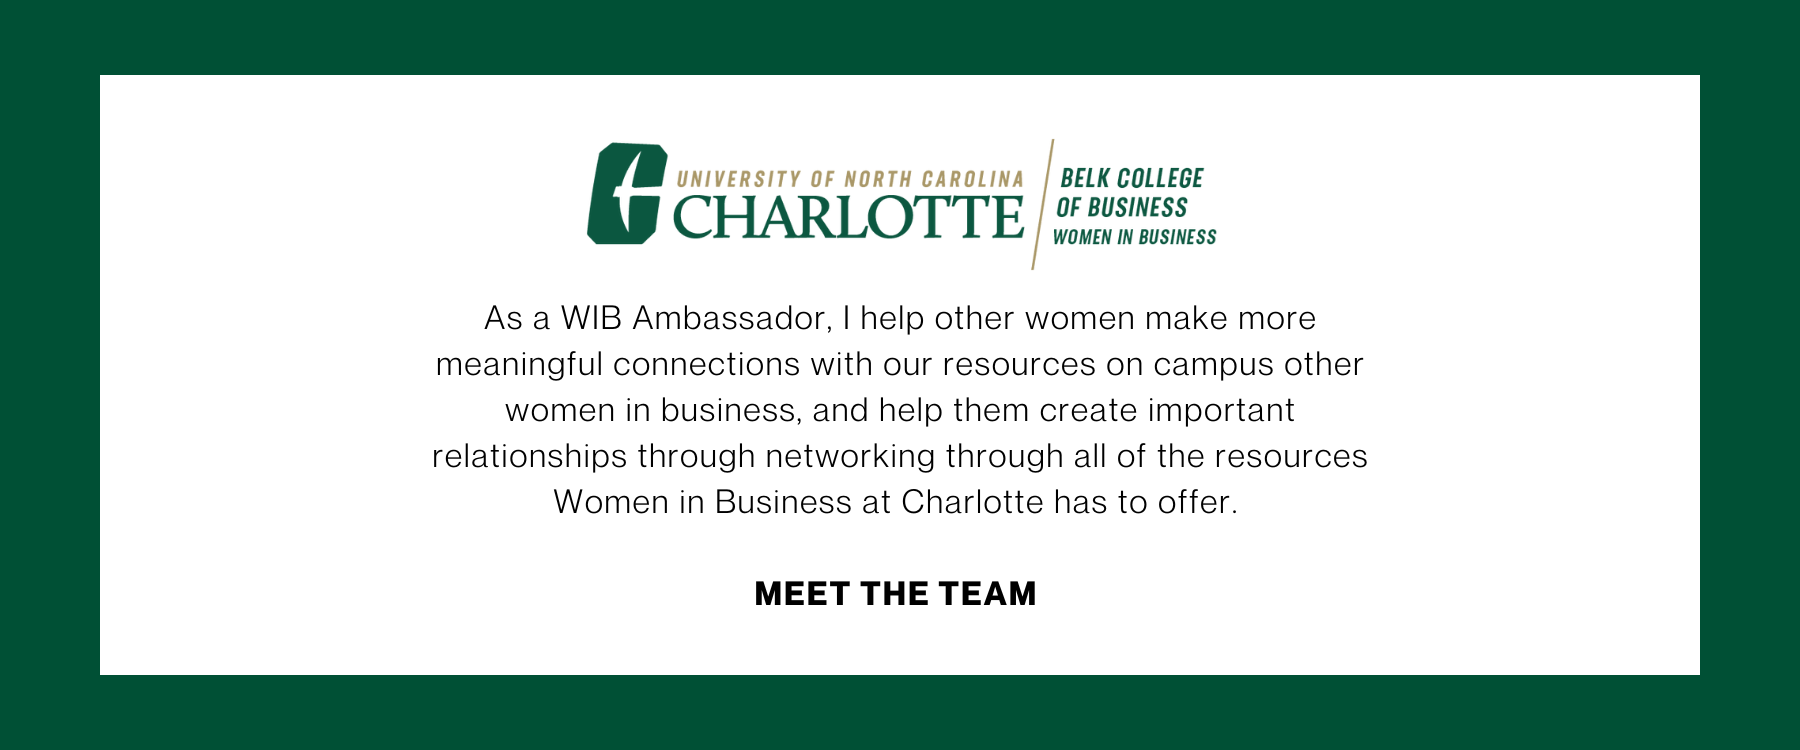 As a WIB Ambassador, I help other women make more meaningful connections with our resources on campus other women in business, and help them create important relationships through networking through all of the resources Women in Business at Charlotte has to offer. Meet the Team